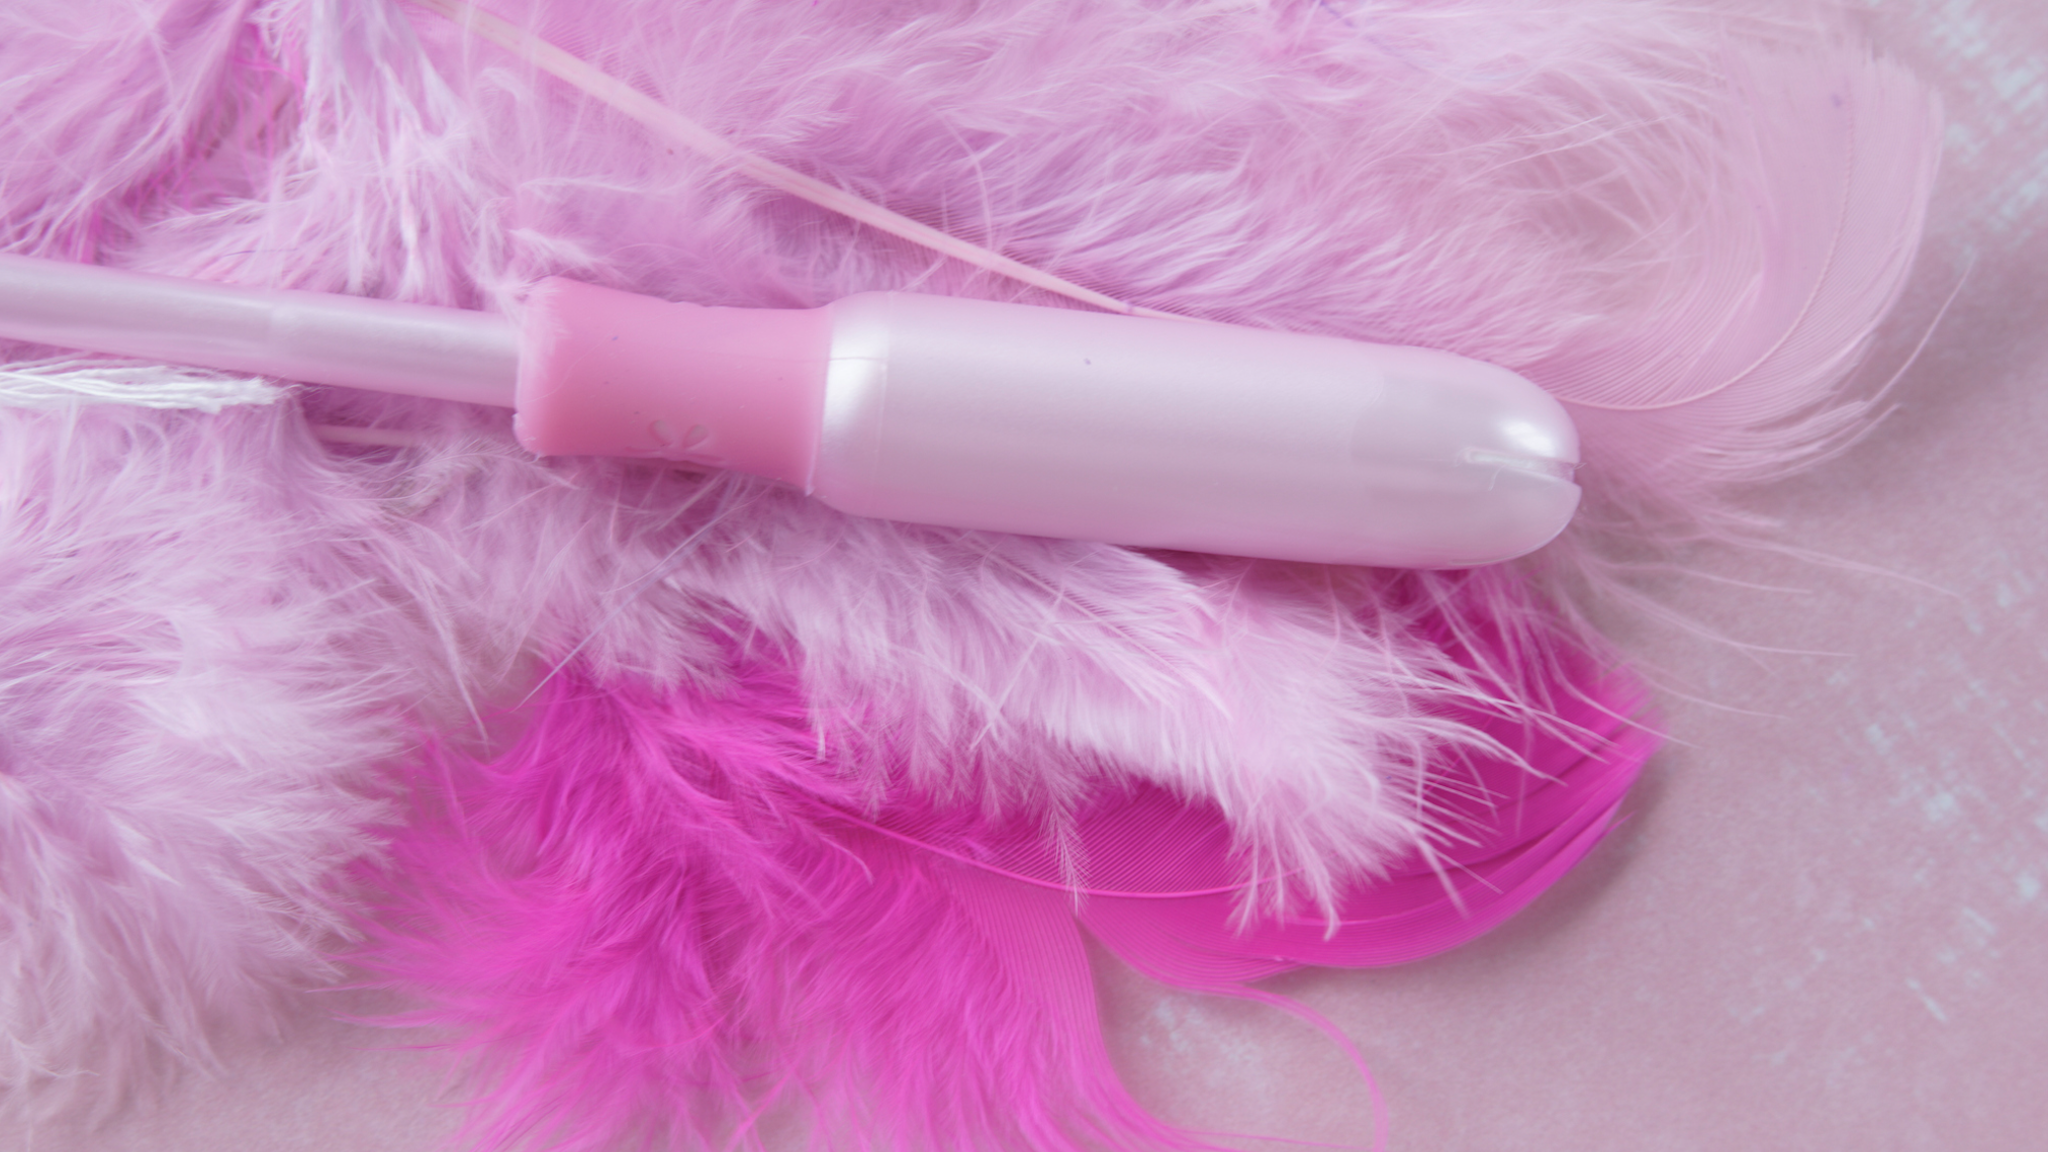 Modern menstruation. Still life of sanitary tampon with pink applicator with on a pink background withsoft pink feathers to give the conceptual idea of a light menstrual flow. Space for copy.